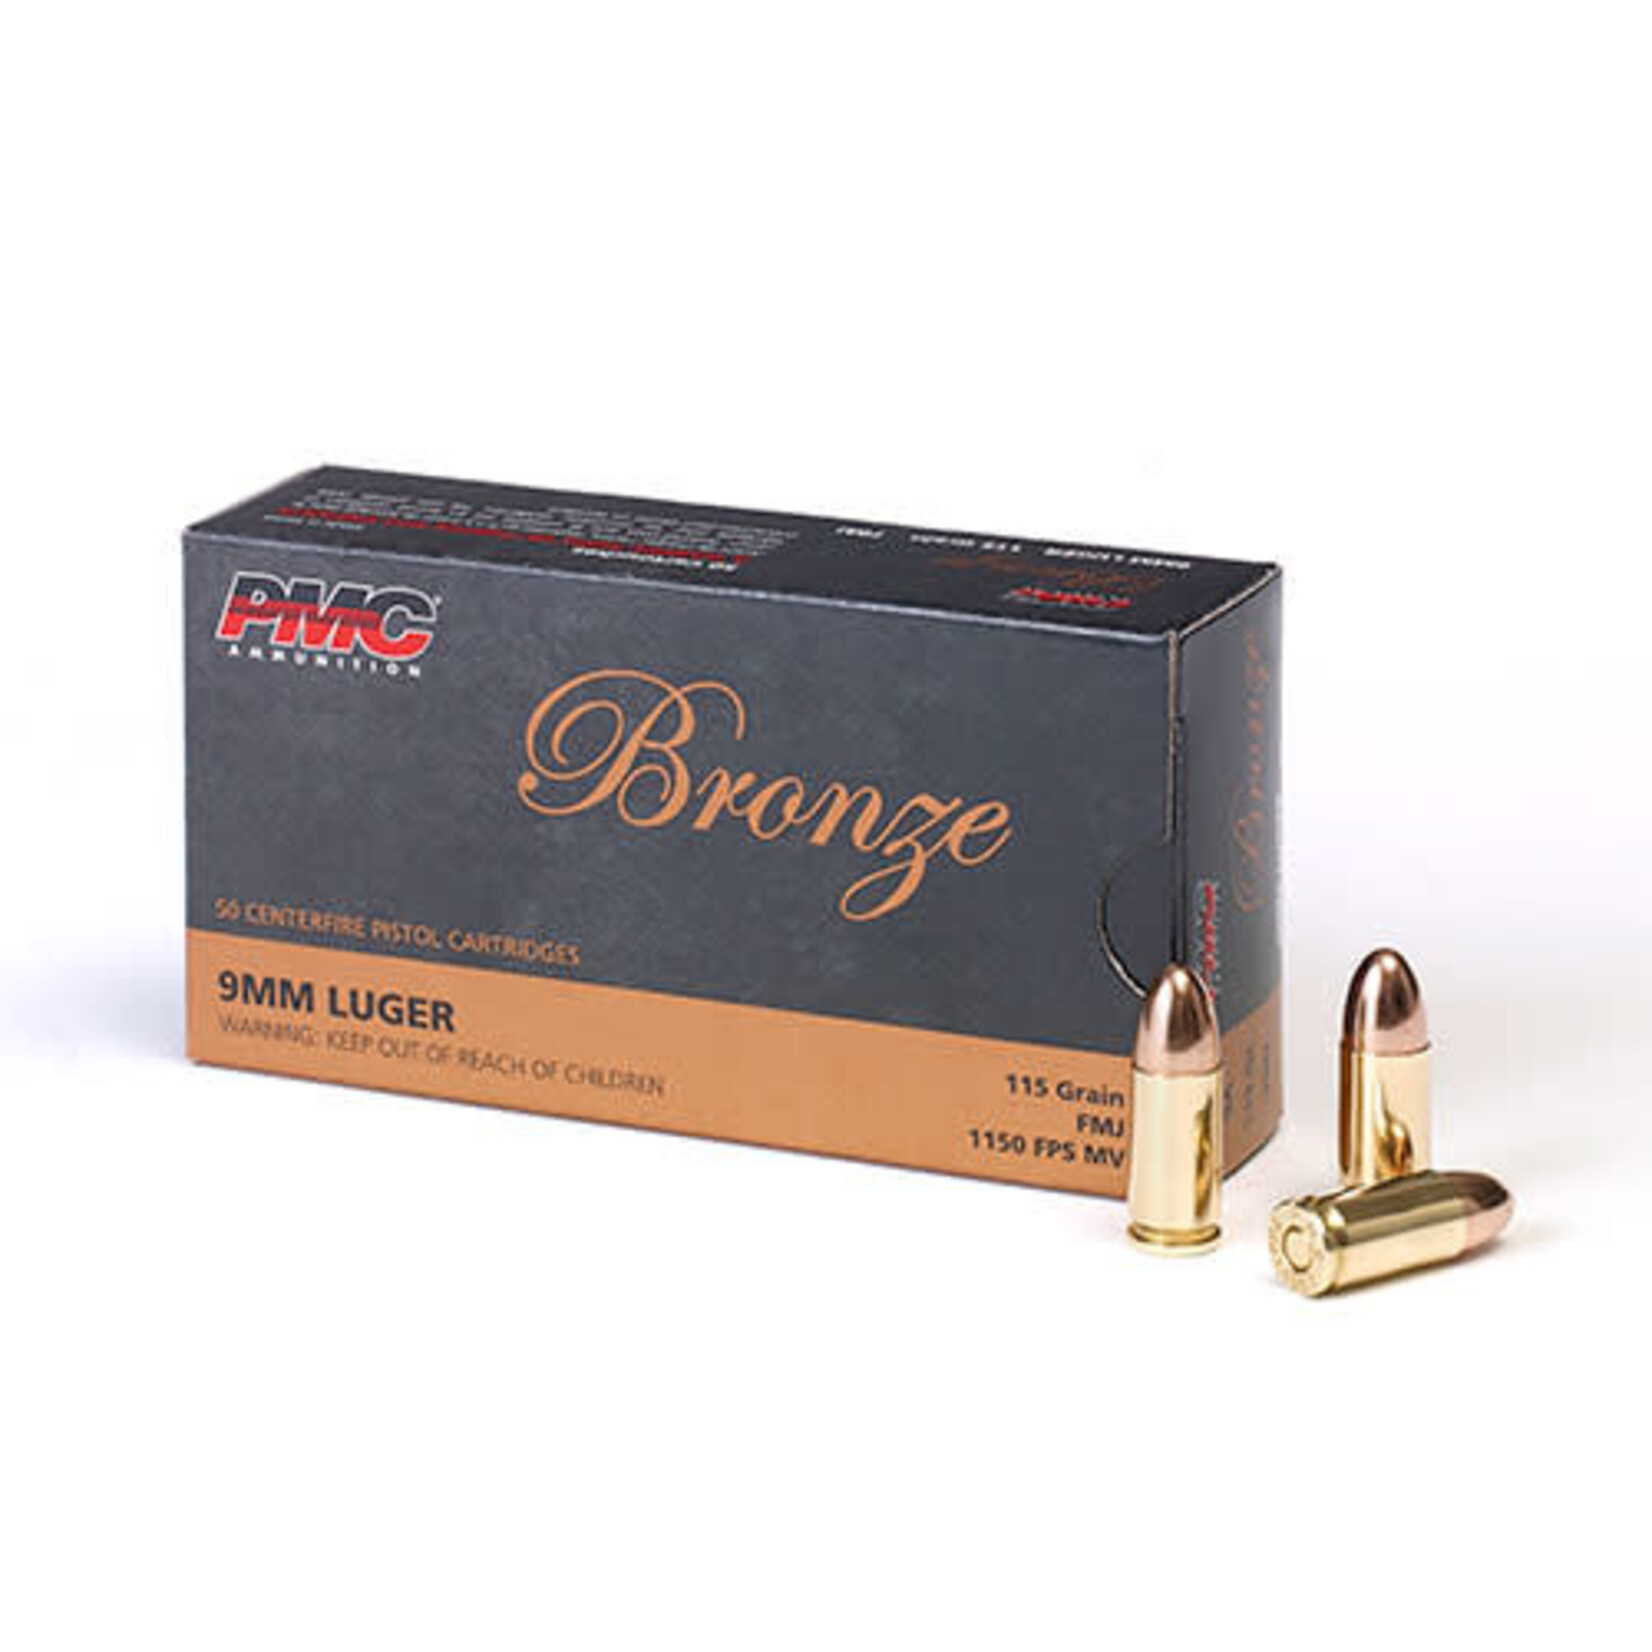 PMC Munitions Pmc Bronze Cal.9Mm Luger 115 Gr Fmj